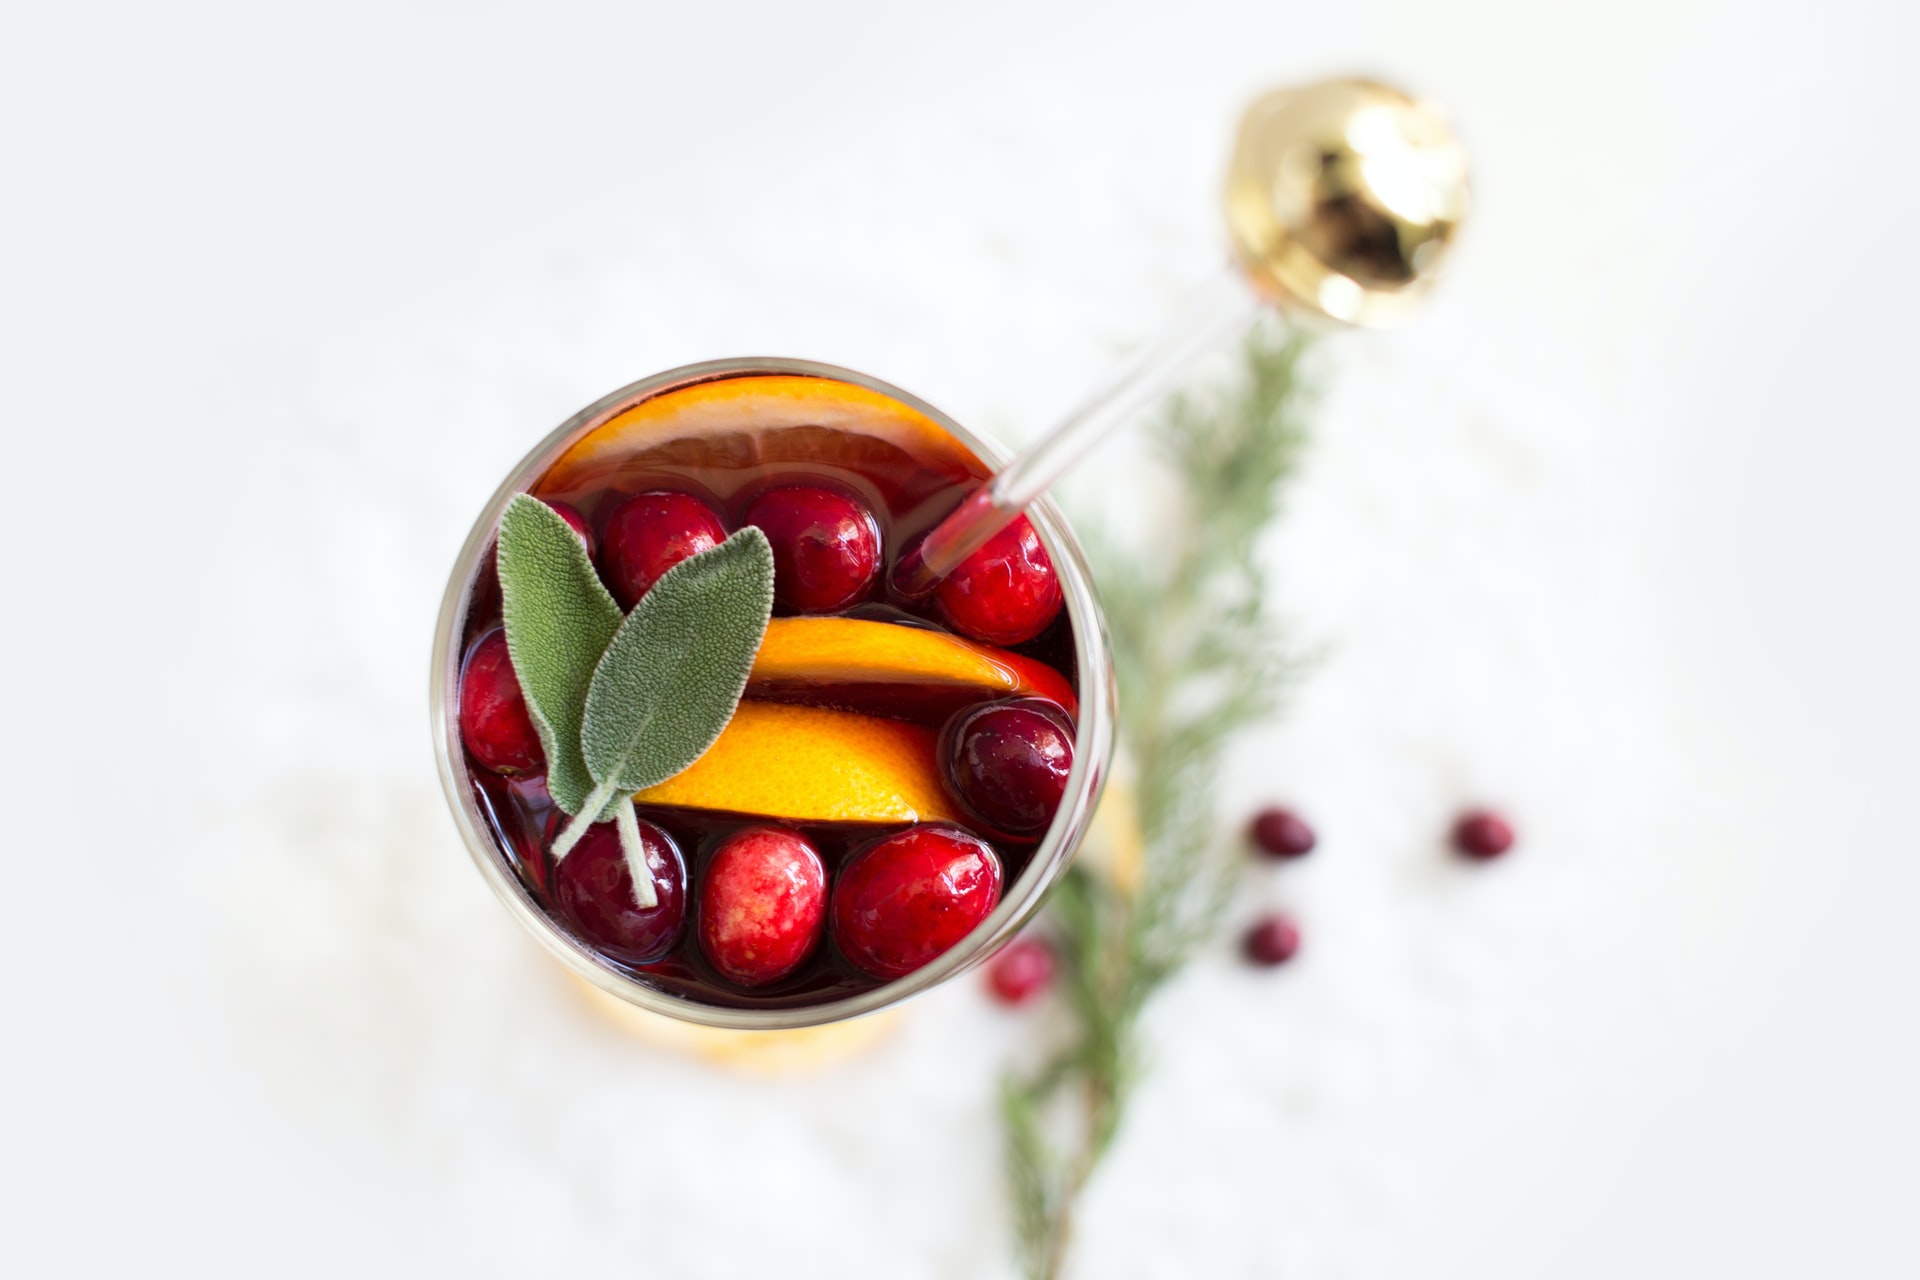 An arial view of a glass of sangria with sage, cranberries, and orange wedges.